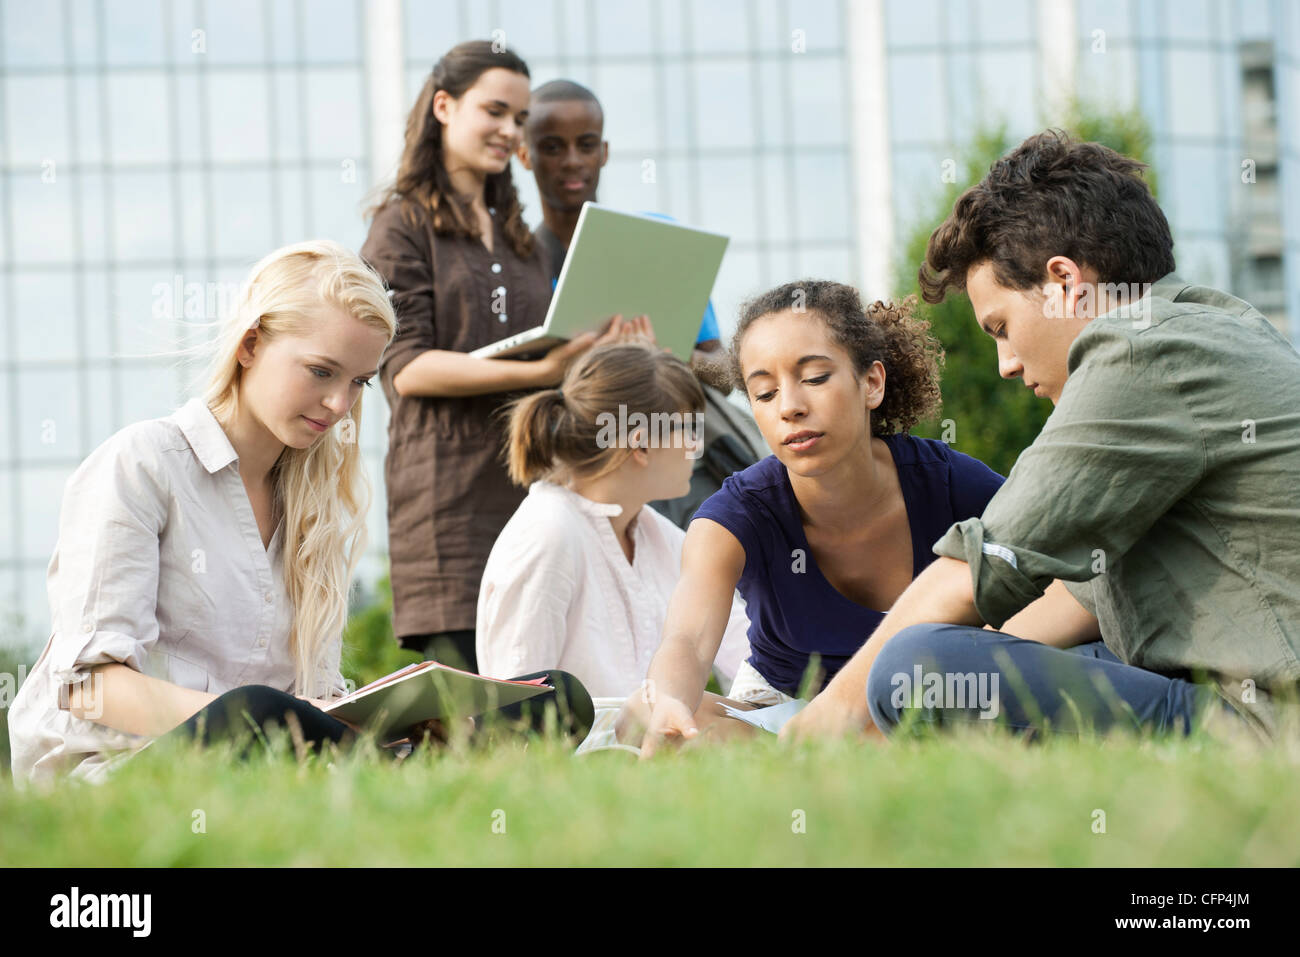 University students studying together outdoors, low angle view Stock Photo